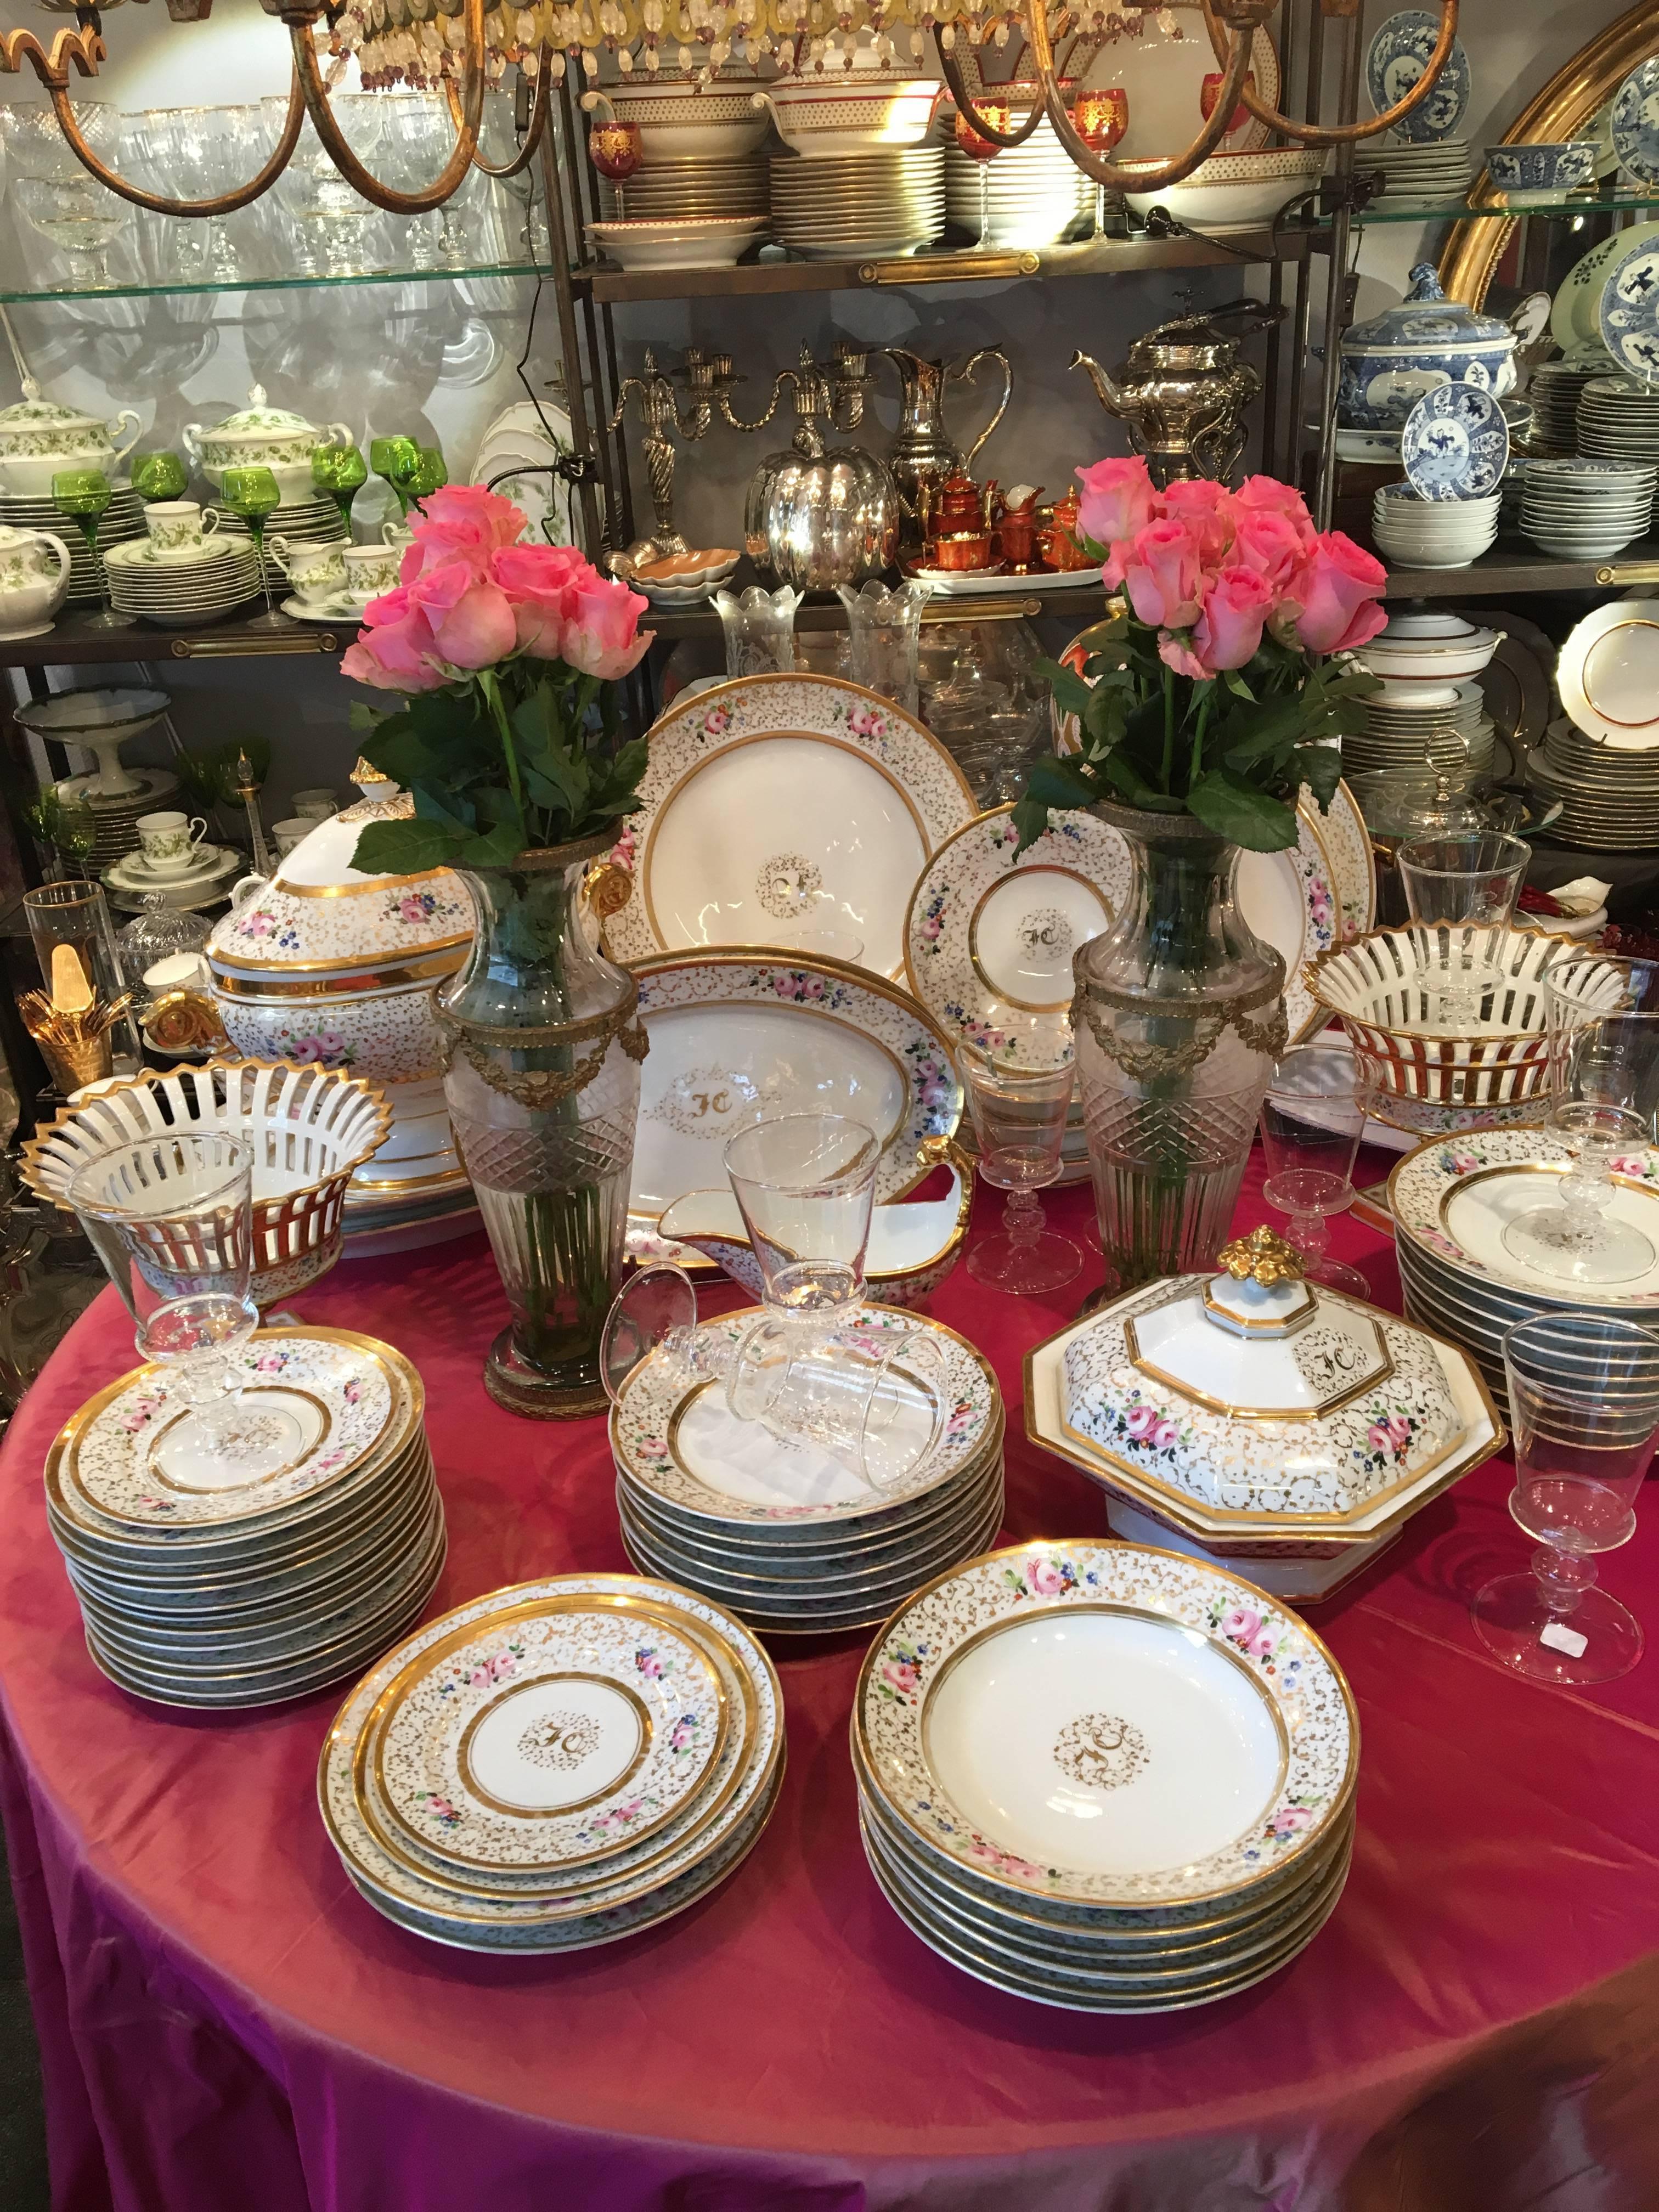 Splendid Restauration period Porcelaine de Paris table service including around 60 pieces such as tureens, vegetable dishes, service plates, comports, flat plates, hollow plates, dessert plates, etc...
circa 1830.

In good condition.

(The